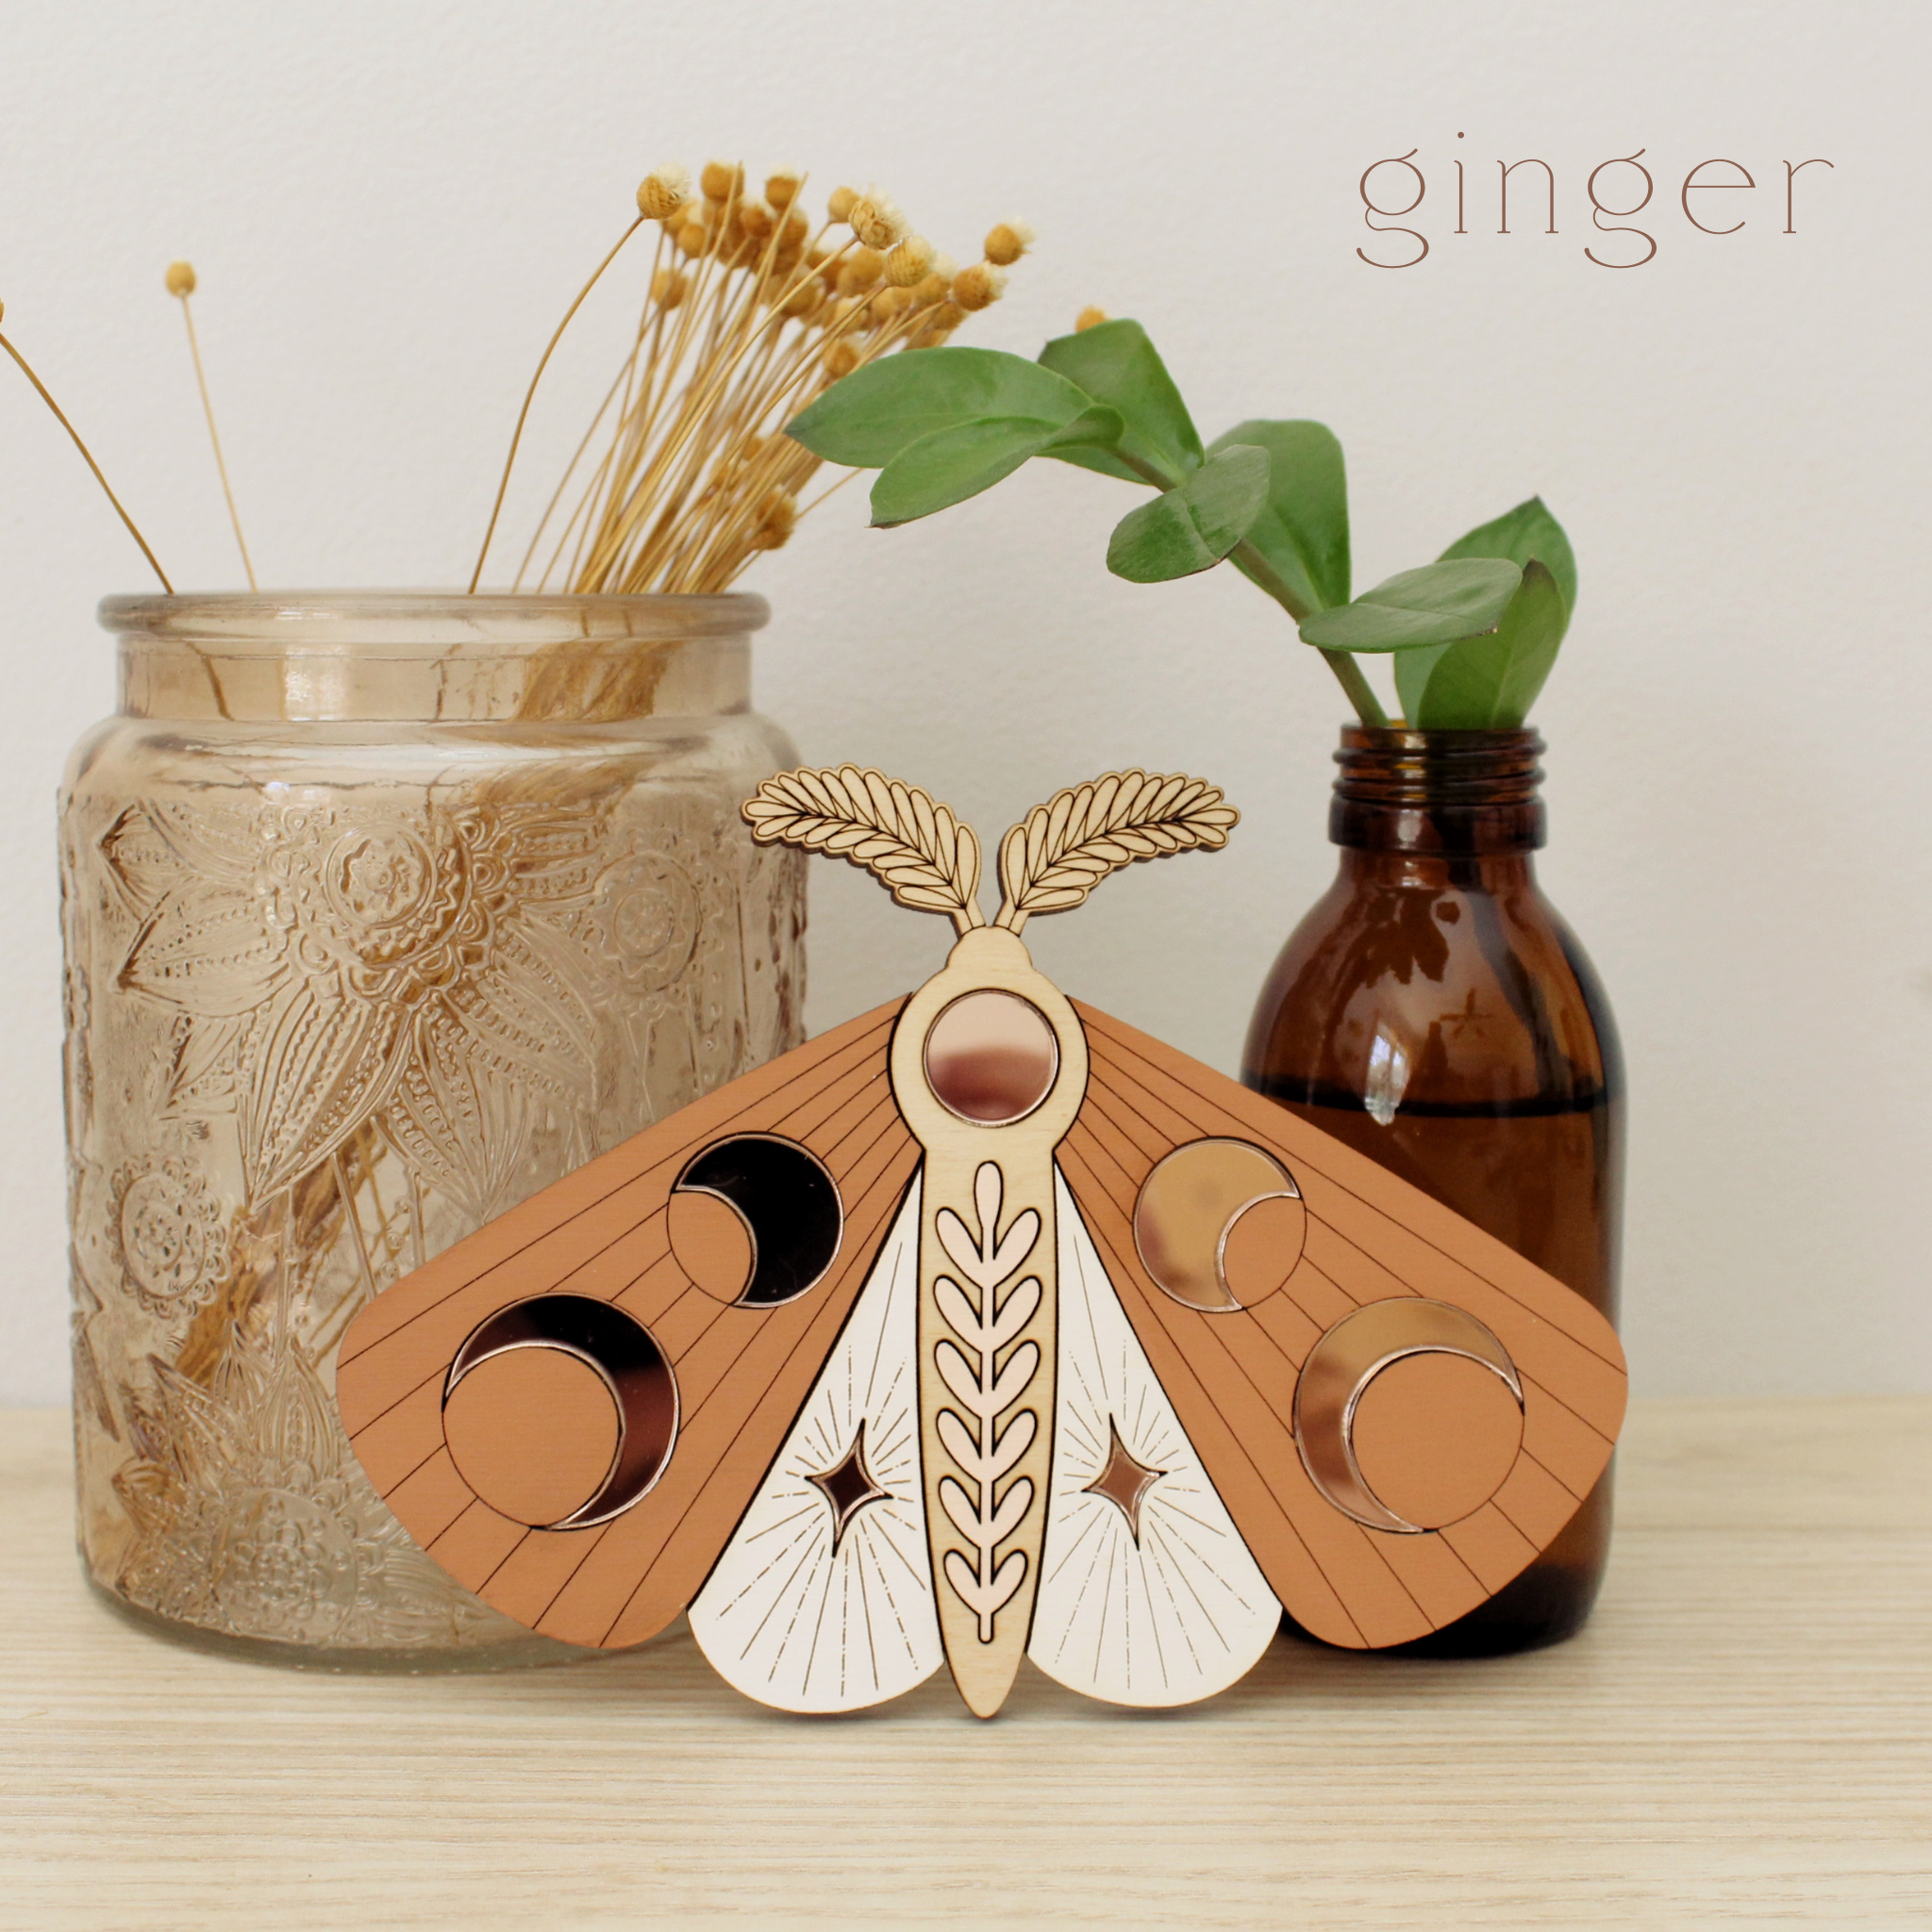 wooden moth with moon phase design. painted in orange and white with wood tones and mirrored rose gold moon phase inlays.